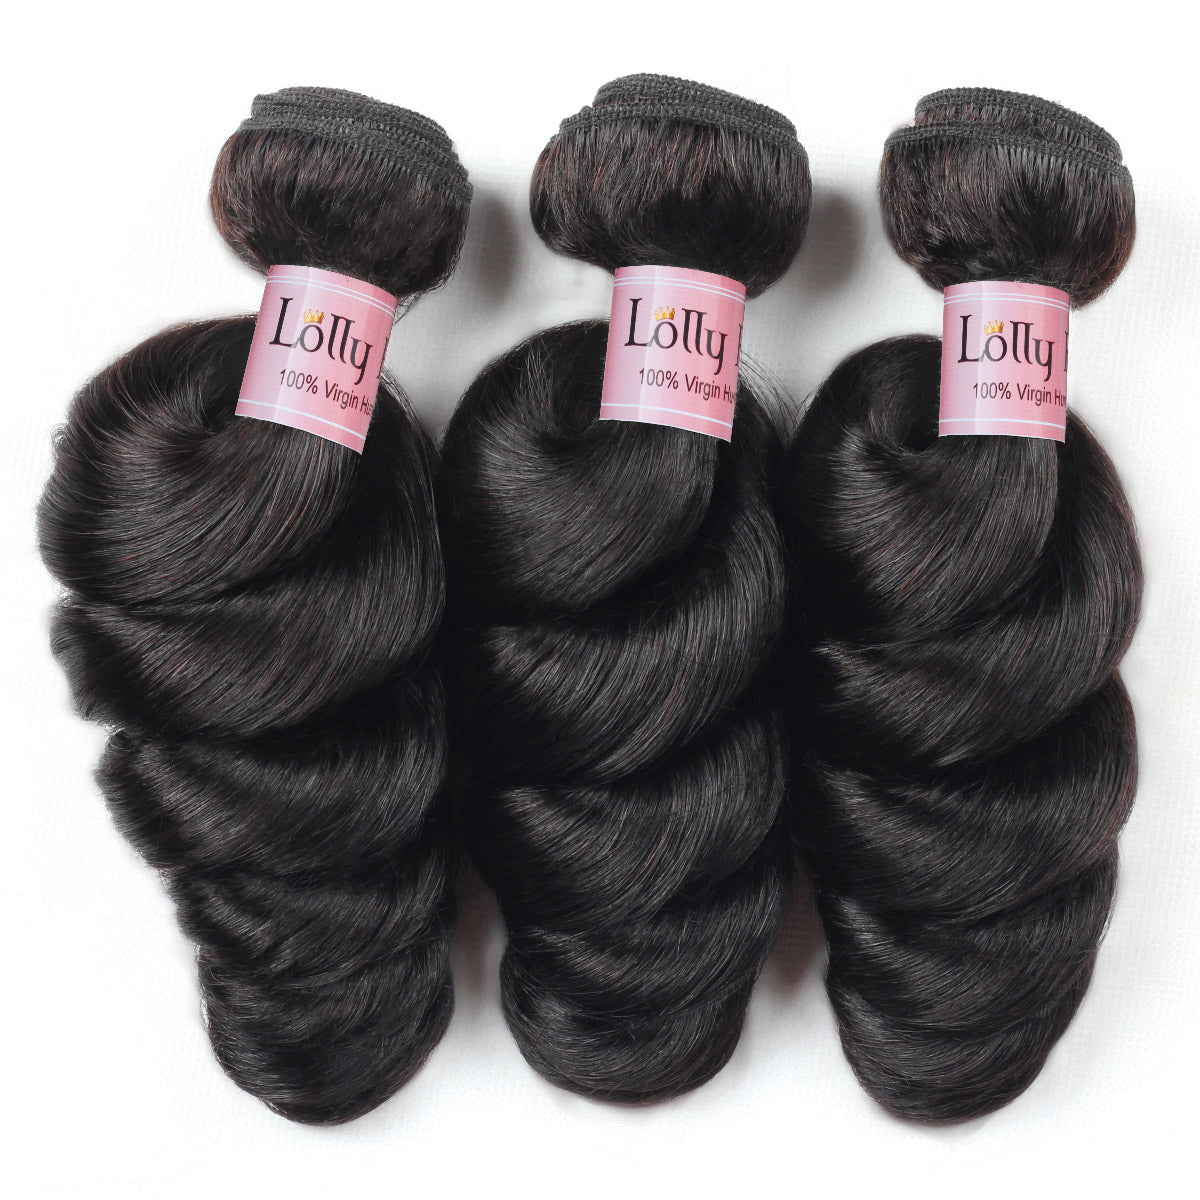 Lolly Loose Wave Hair Extensions 3 Bundles